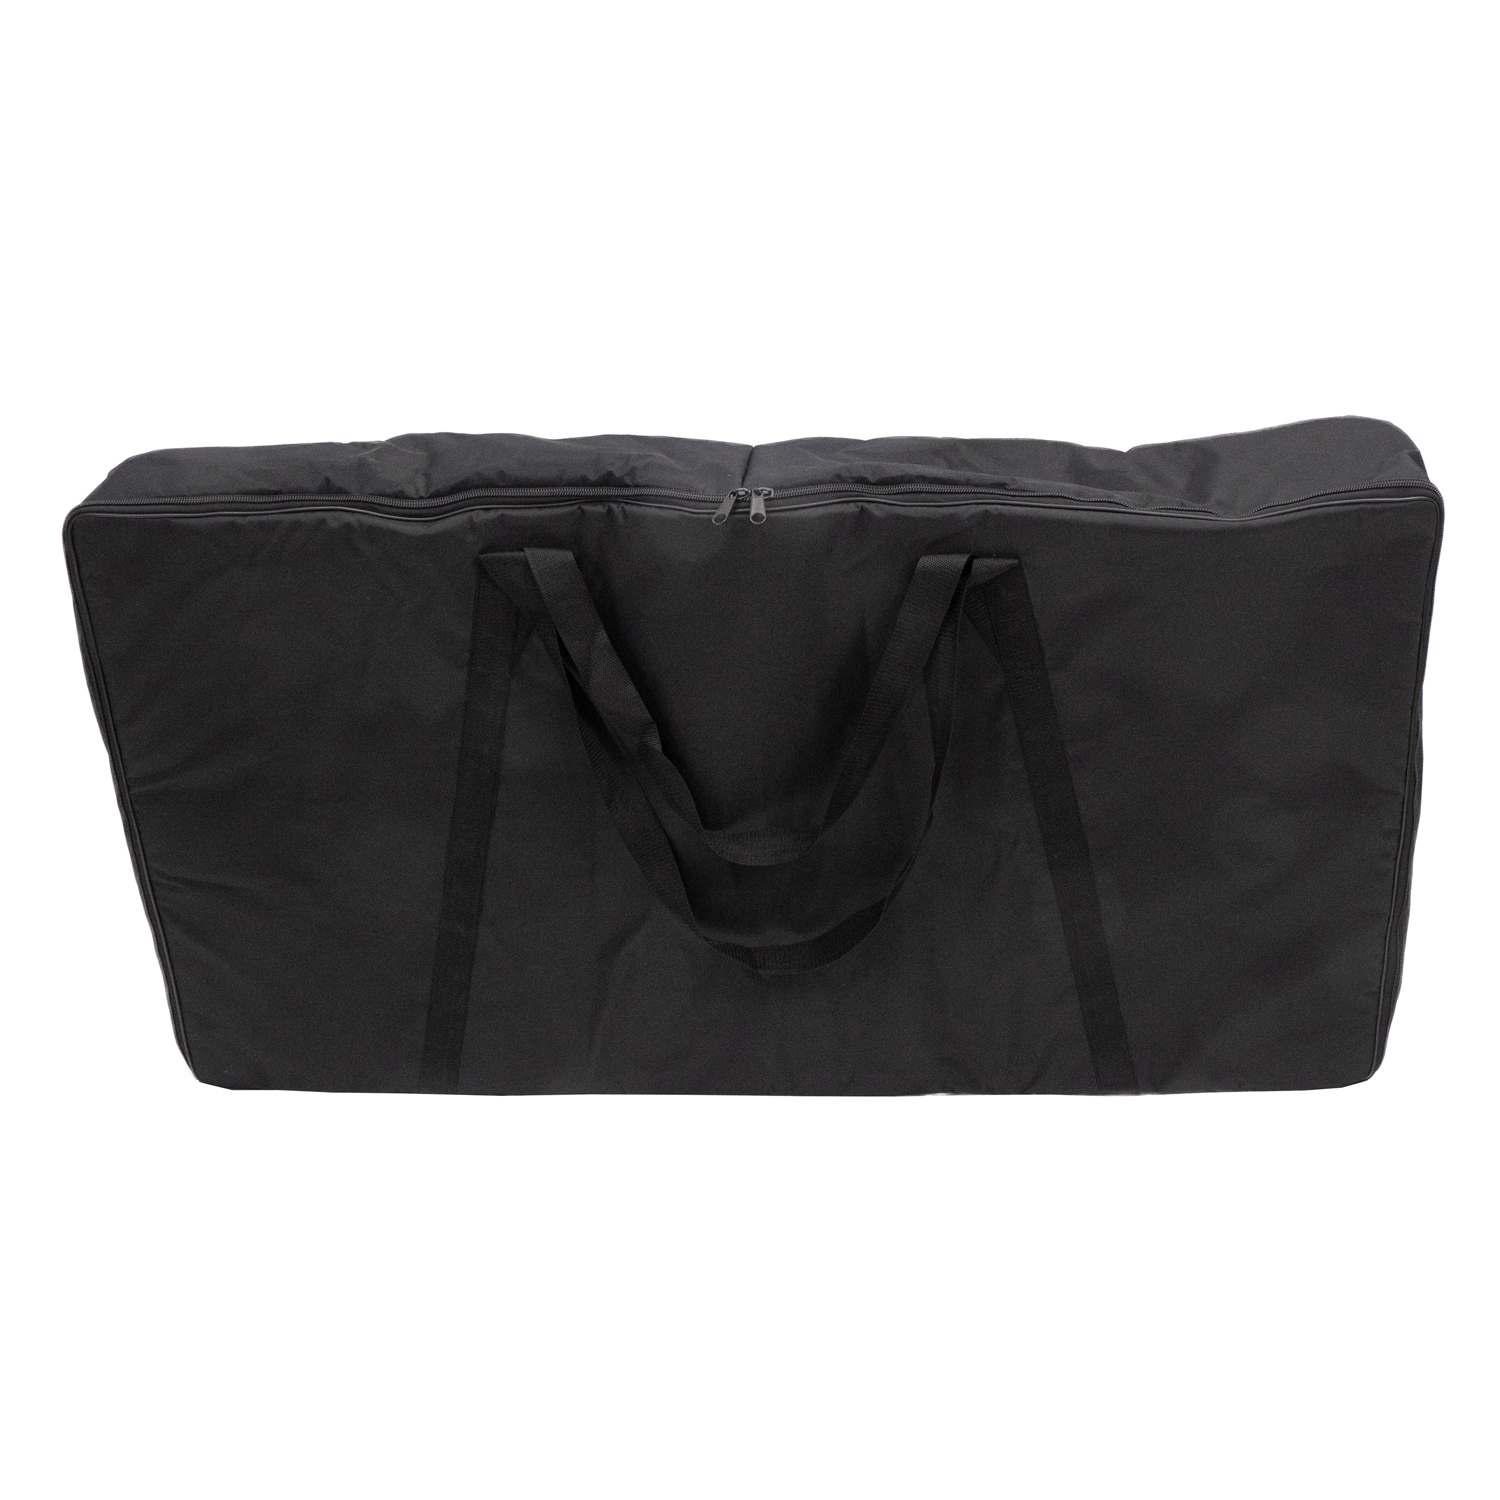  Pro Event Table Bag Heavy Duty